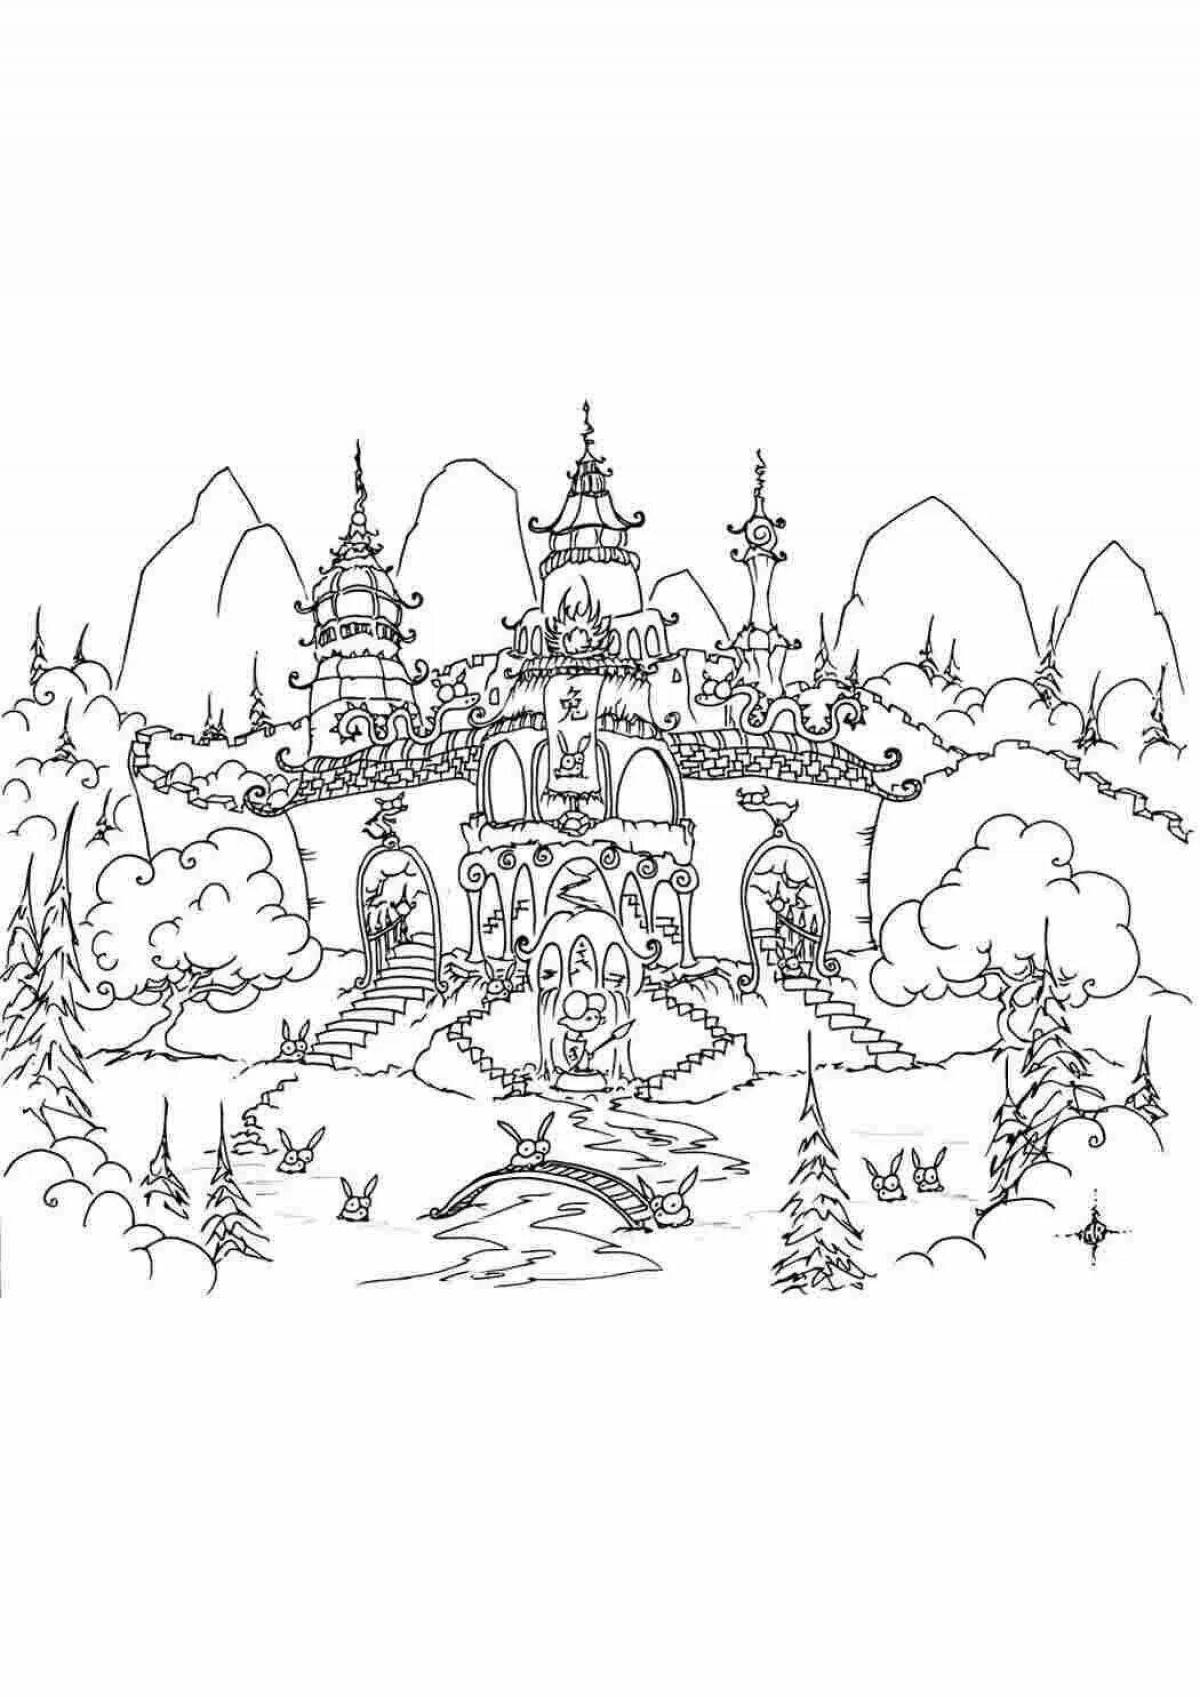 Coloring book decorated fairytale castle